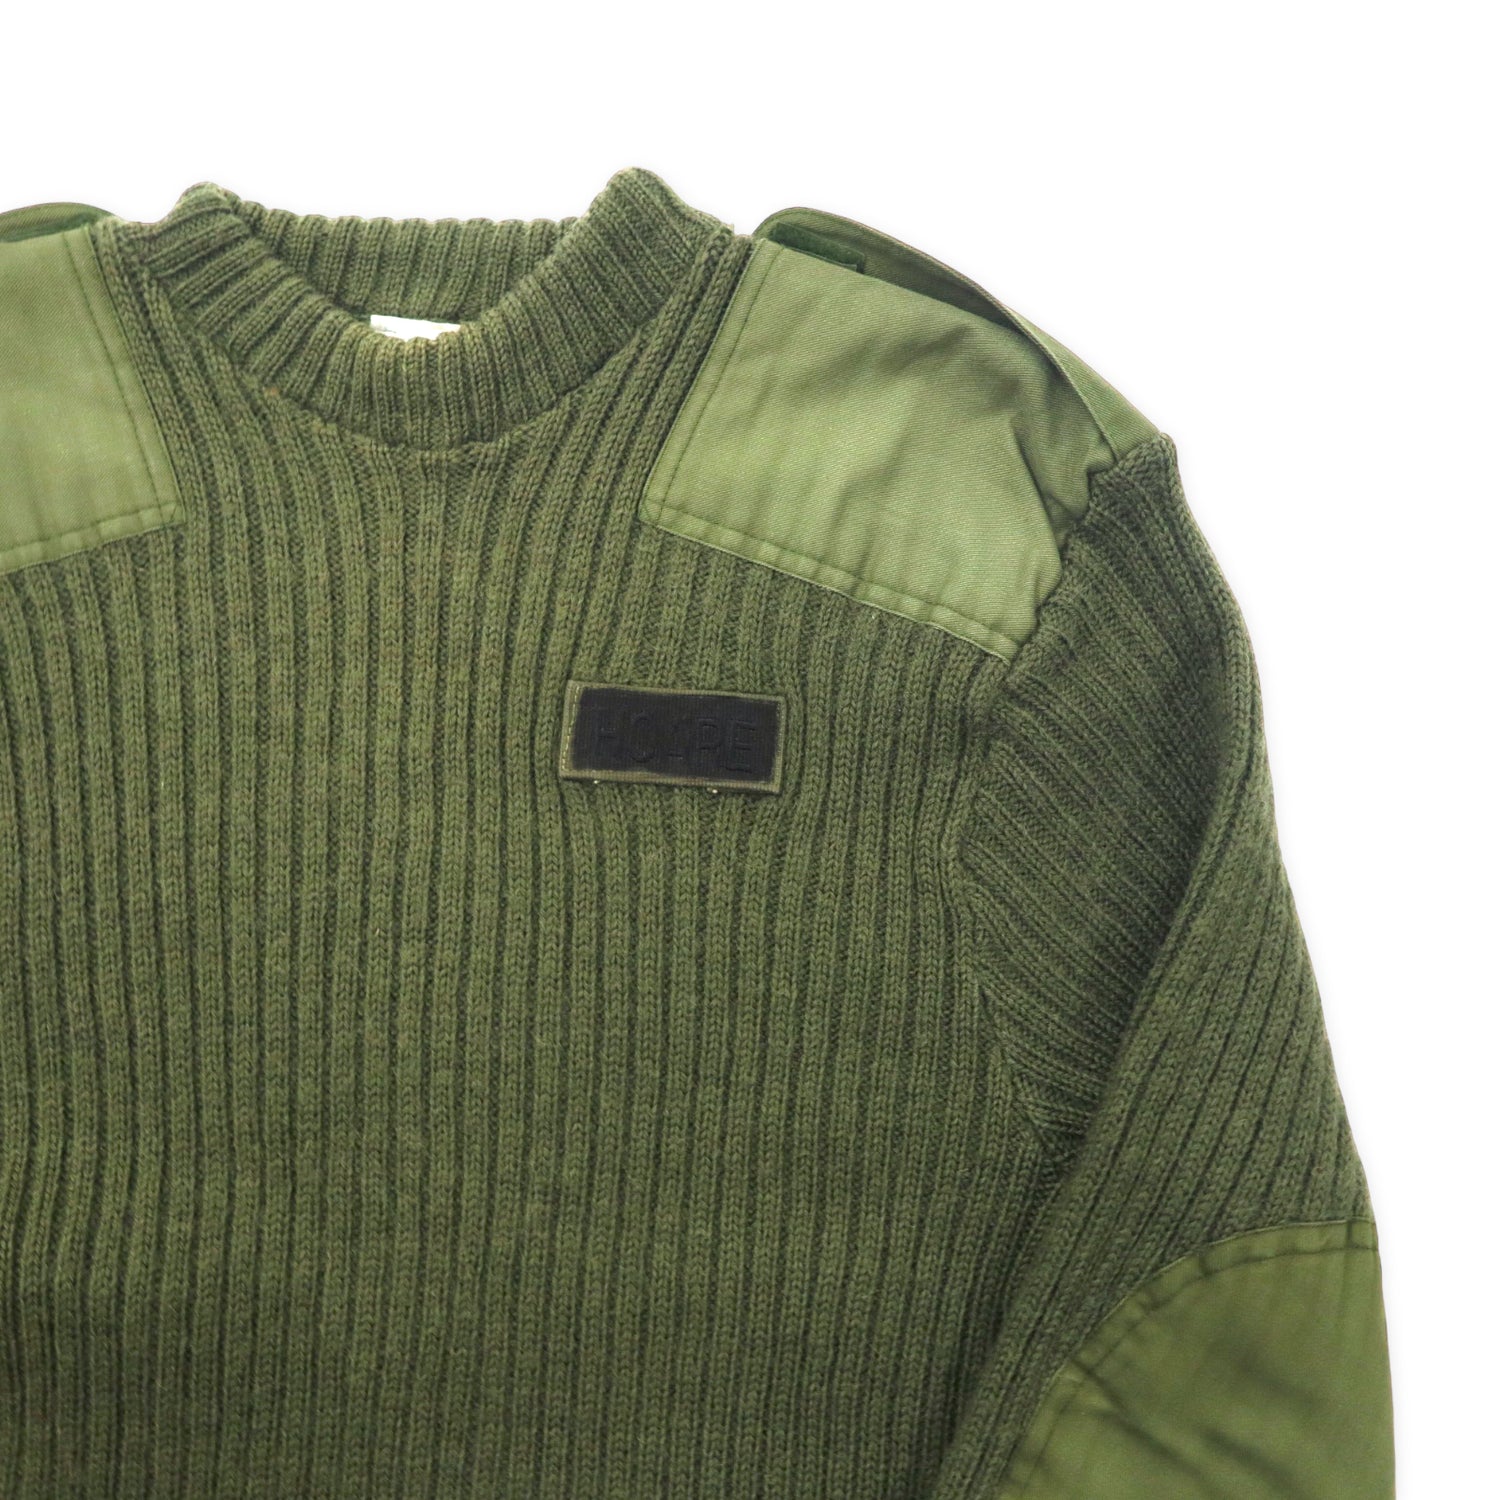 British Army 90's Command Knit Sweater L KHAKI Wool Military Elbow ...